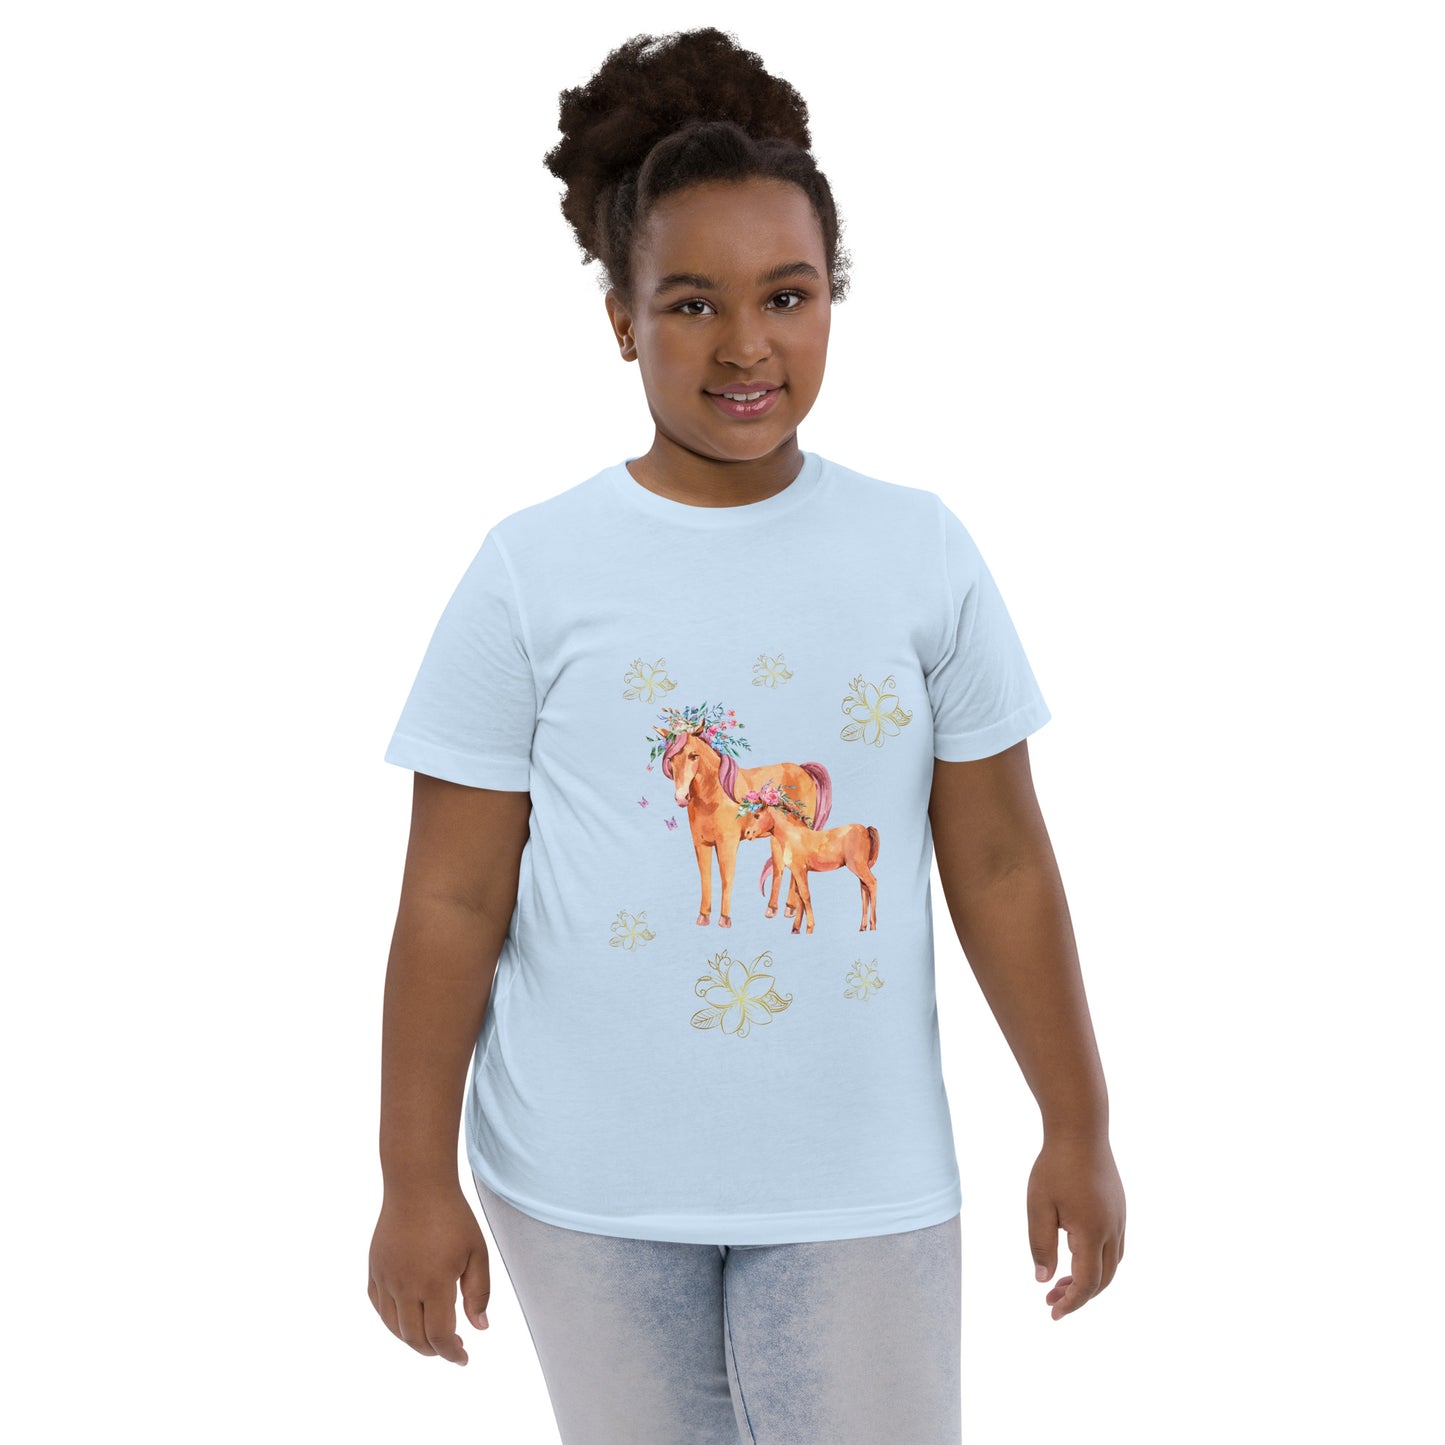 Whimsical Watercolor Horse and Foal Flower Crown Youth Tee - 100% Cotton, Soft Jersey, Equestrian Kids T-Shirt, Horse Lover Gift